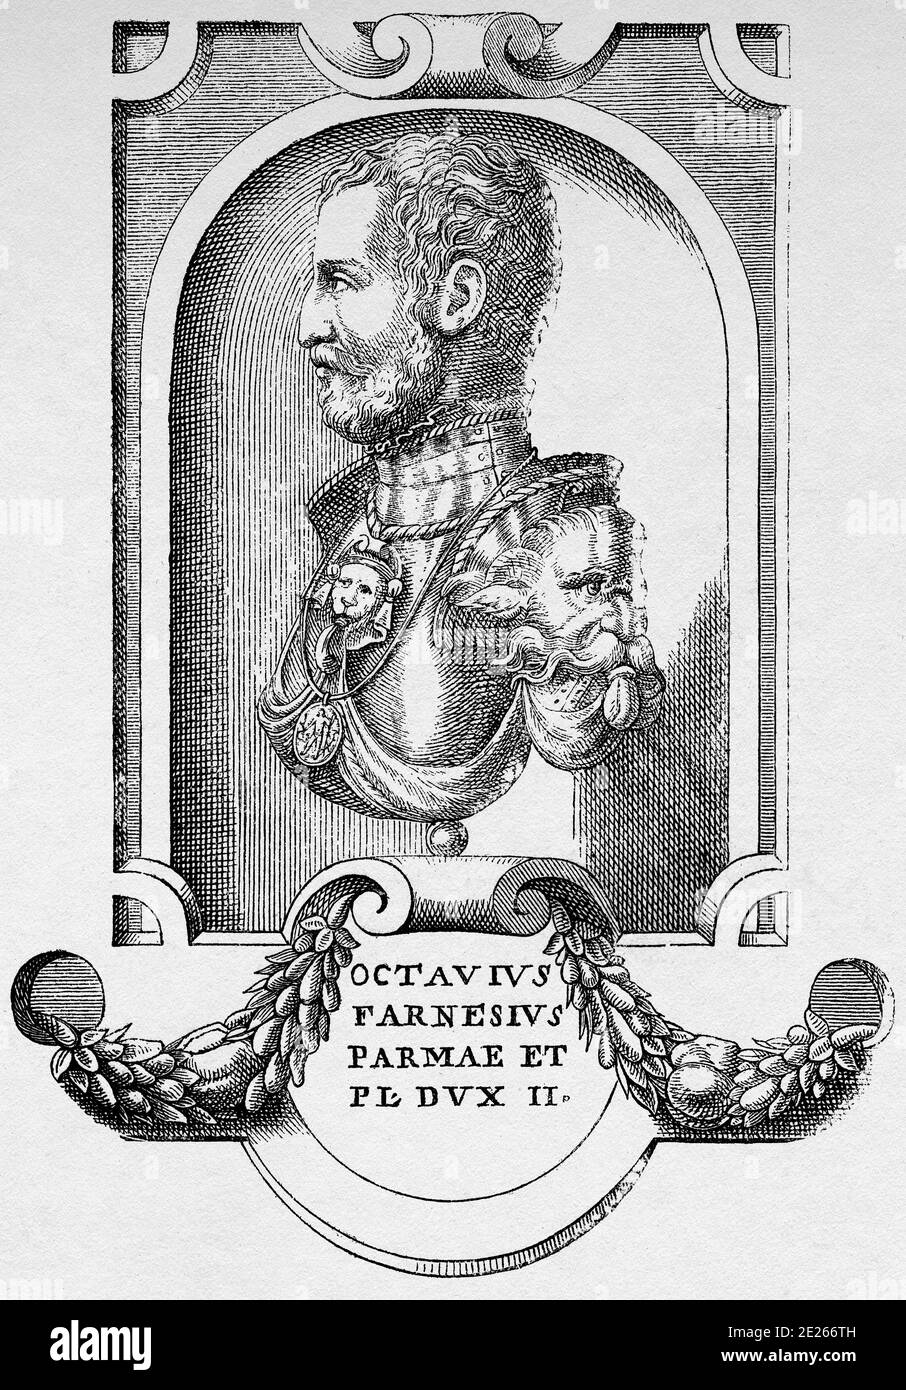 Portrait of Ottavio Farnese (Valentano, October 9, 1524 - September 18, 1586) was the second Duke of Parma and Plasencia. History of Philip II of Spain. Old engraving published in Historia de Felipe II by H. Forneron, in 1884 Stock Photo